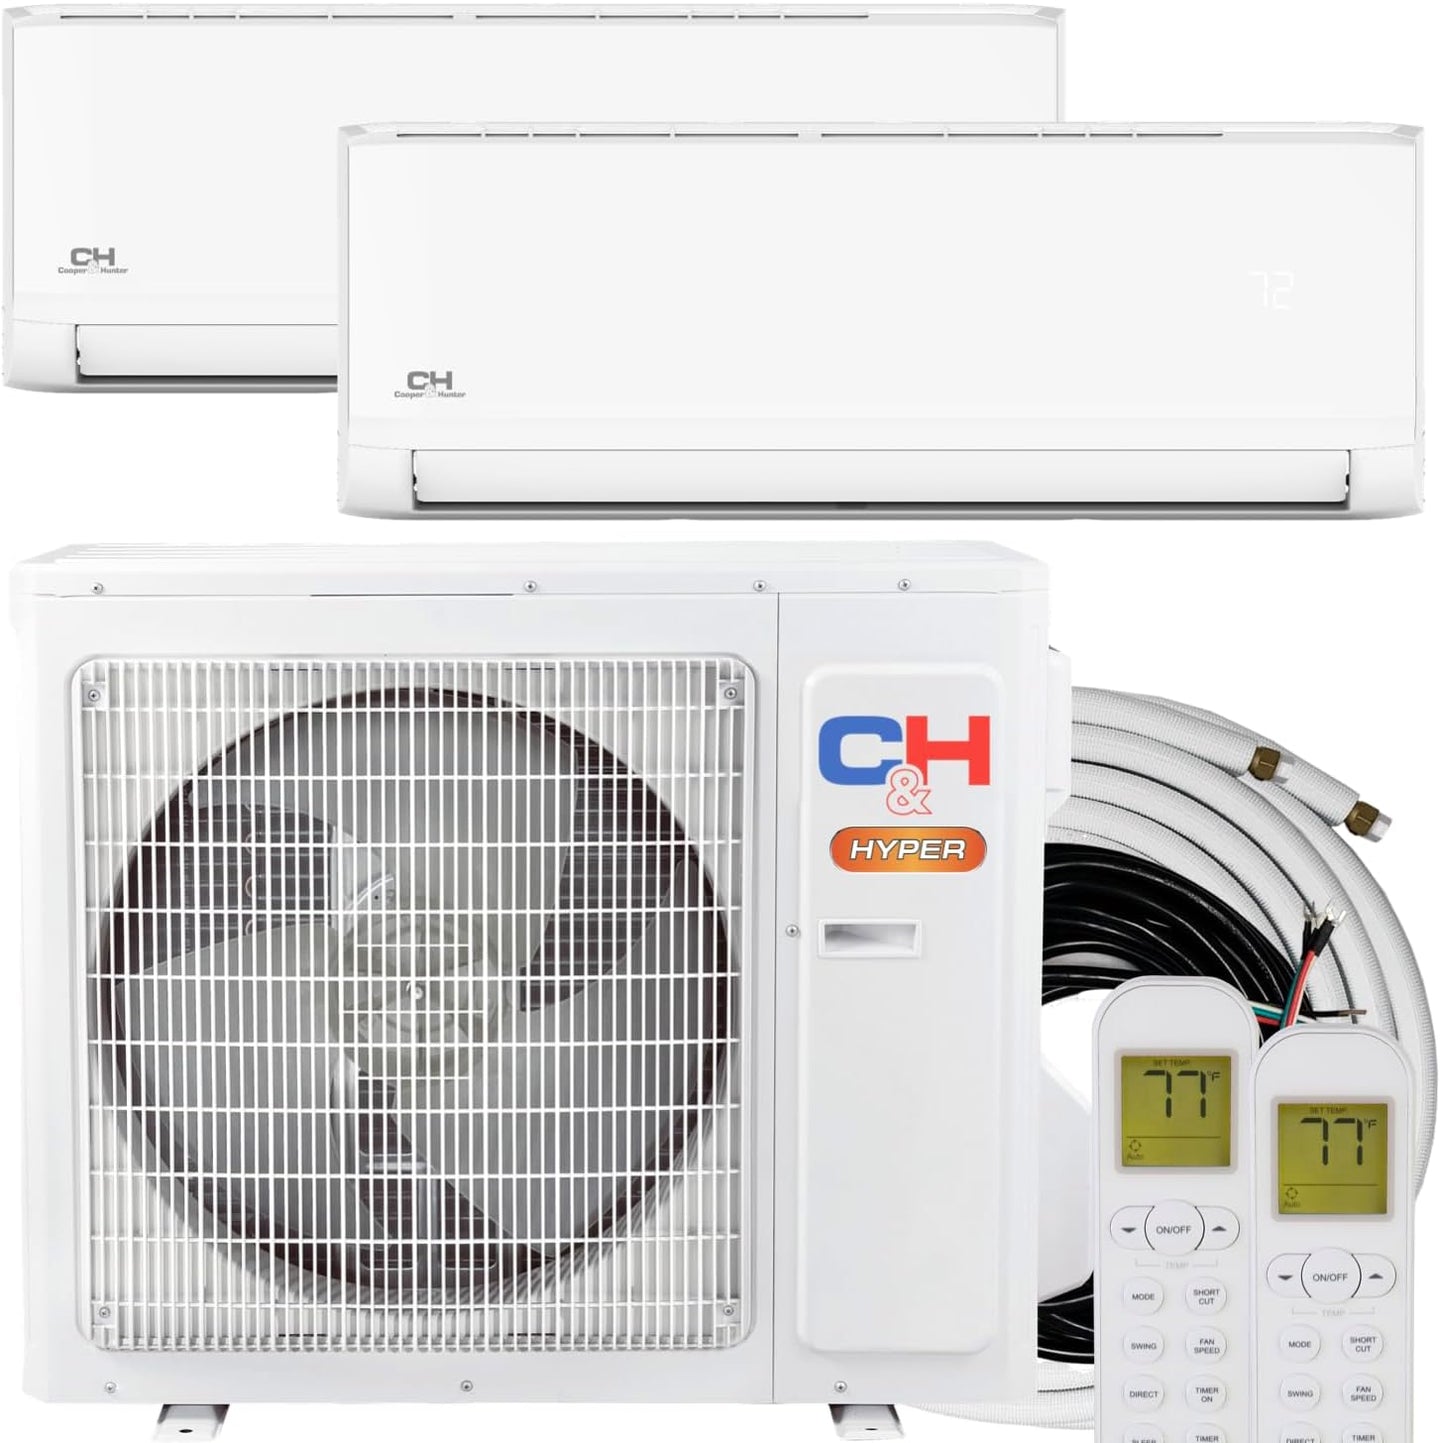 Cooper & Hunter 19,000 BTU Hyper Cooling and Heating Dual 2 Zone 9,000 BTU + 9,000 BTU Wall Mount Ductless Mini Split Heat Pump Air Conditioning System with Installation Kits